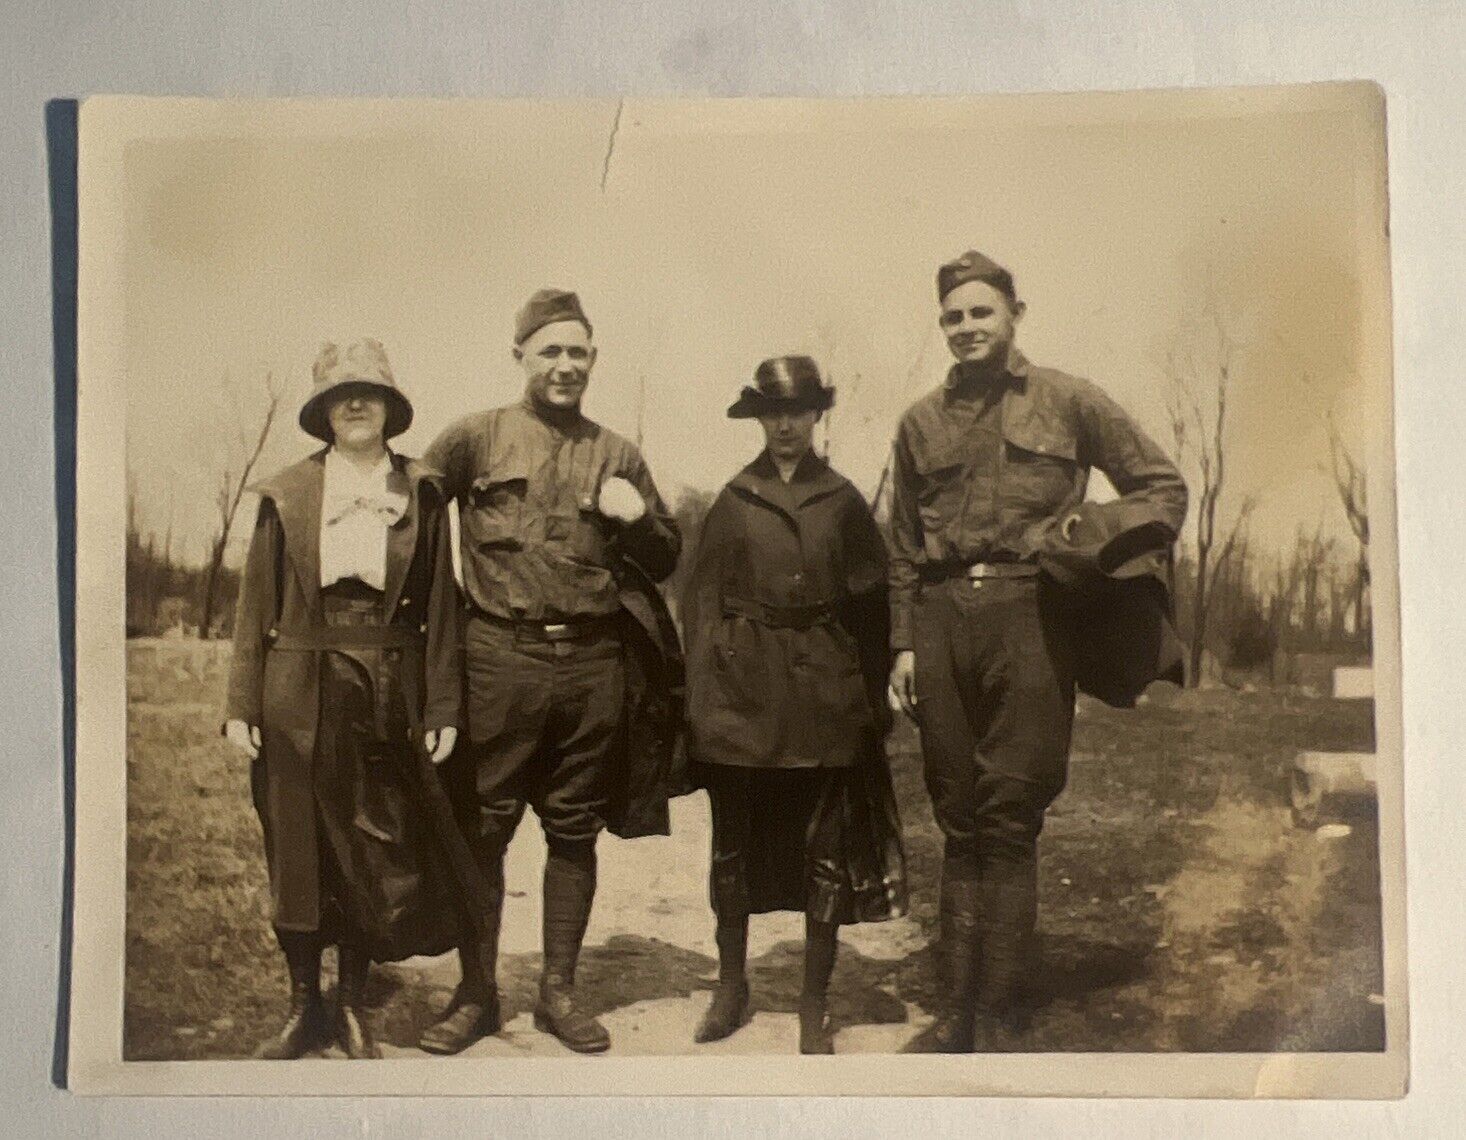 C1918 WWI Photo Of Two US Soldiers With Their Mothers